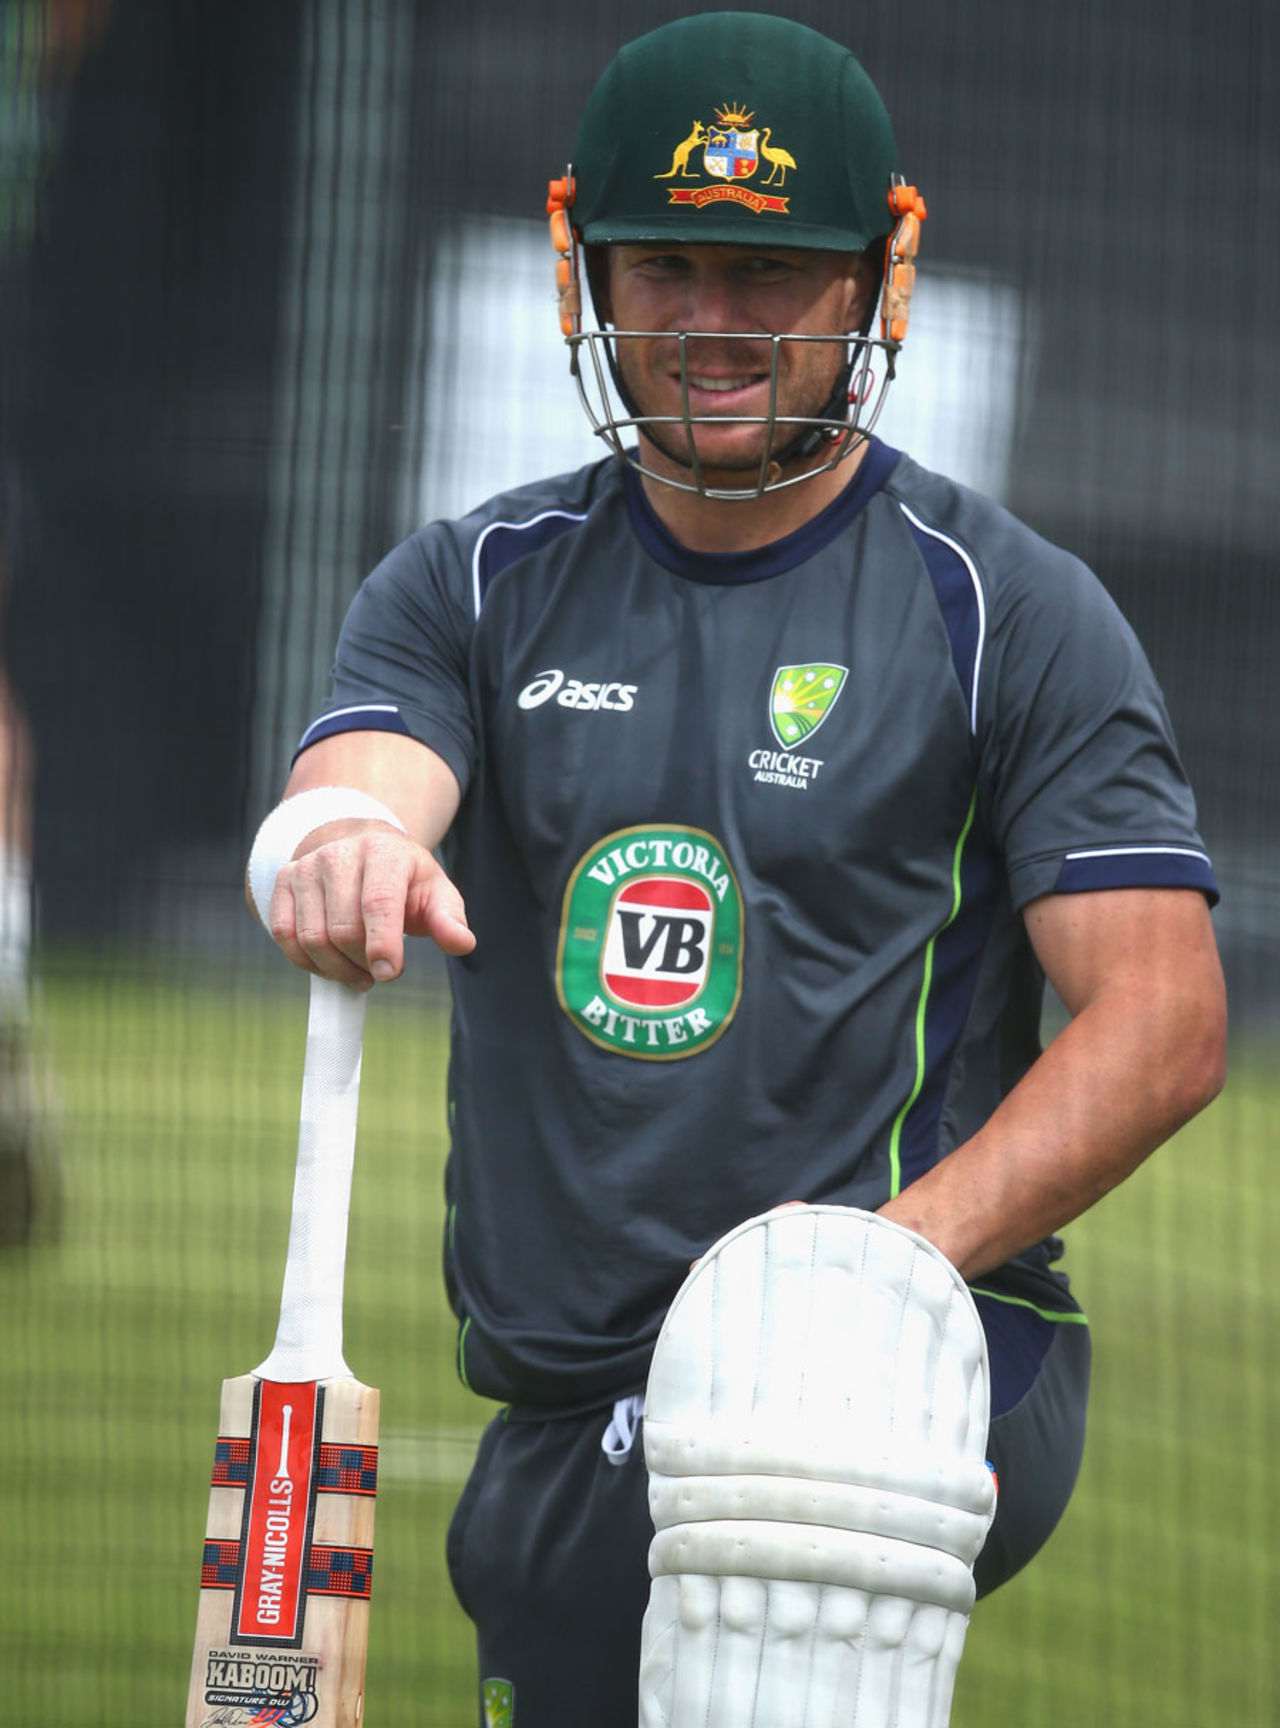 David Warner prepares to bat in the nets, Old Trafford, Manchester, July 30, 2013